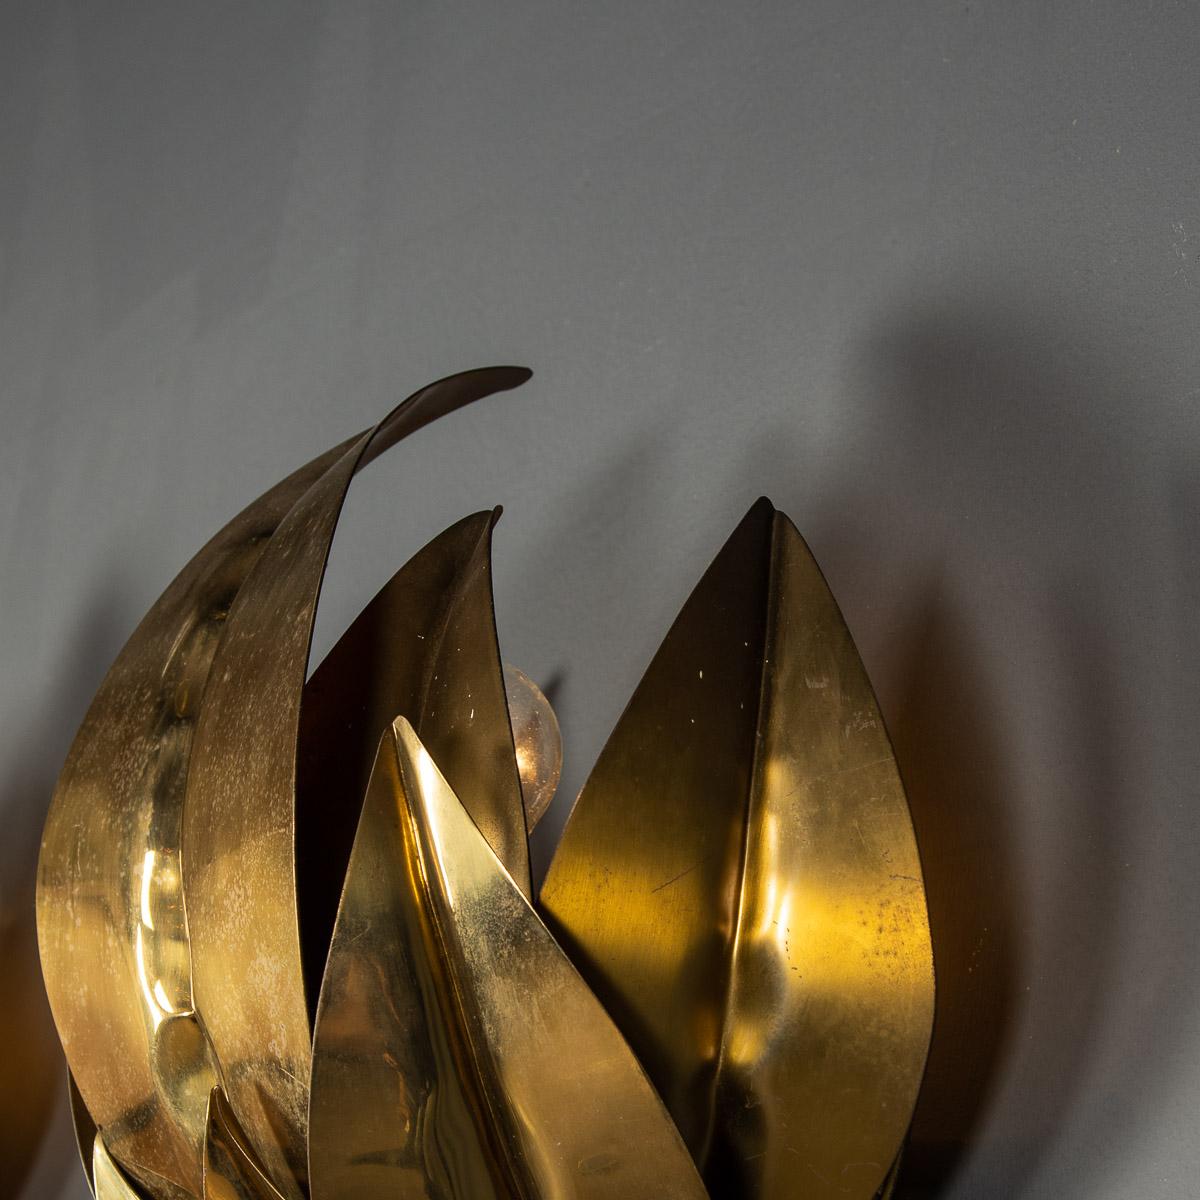 20th Century French Pair Of Brass Sconces Attributed To Maison Jansen, c.1970 For Sale 1